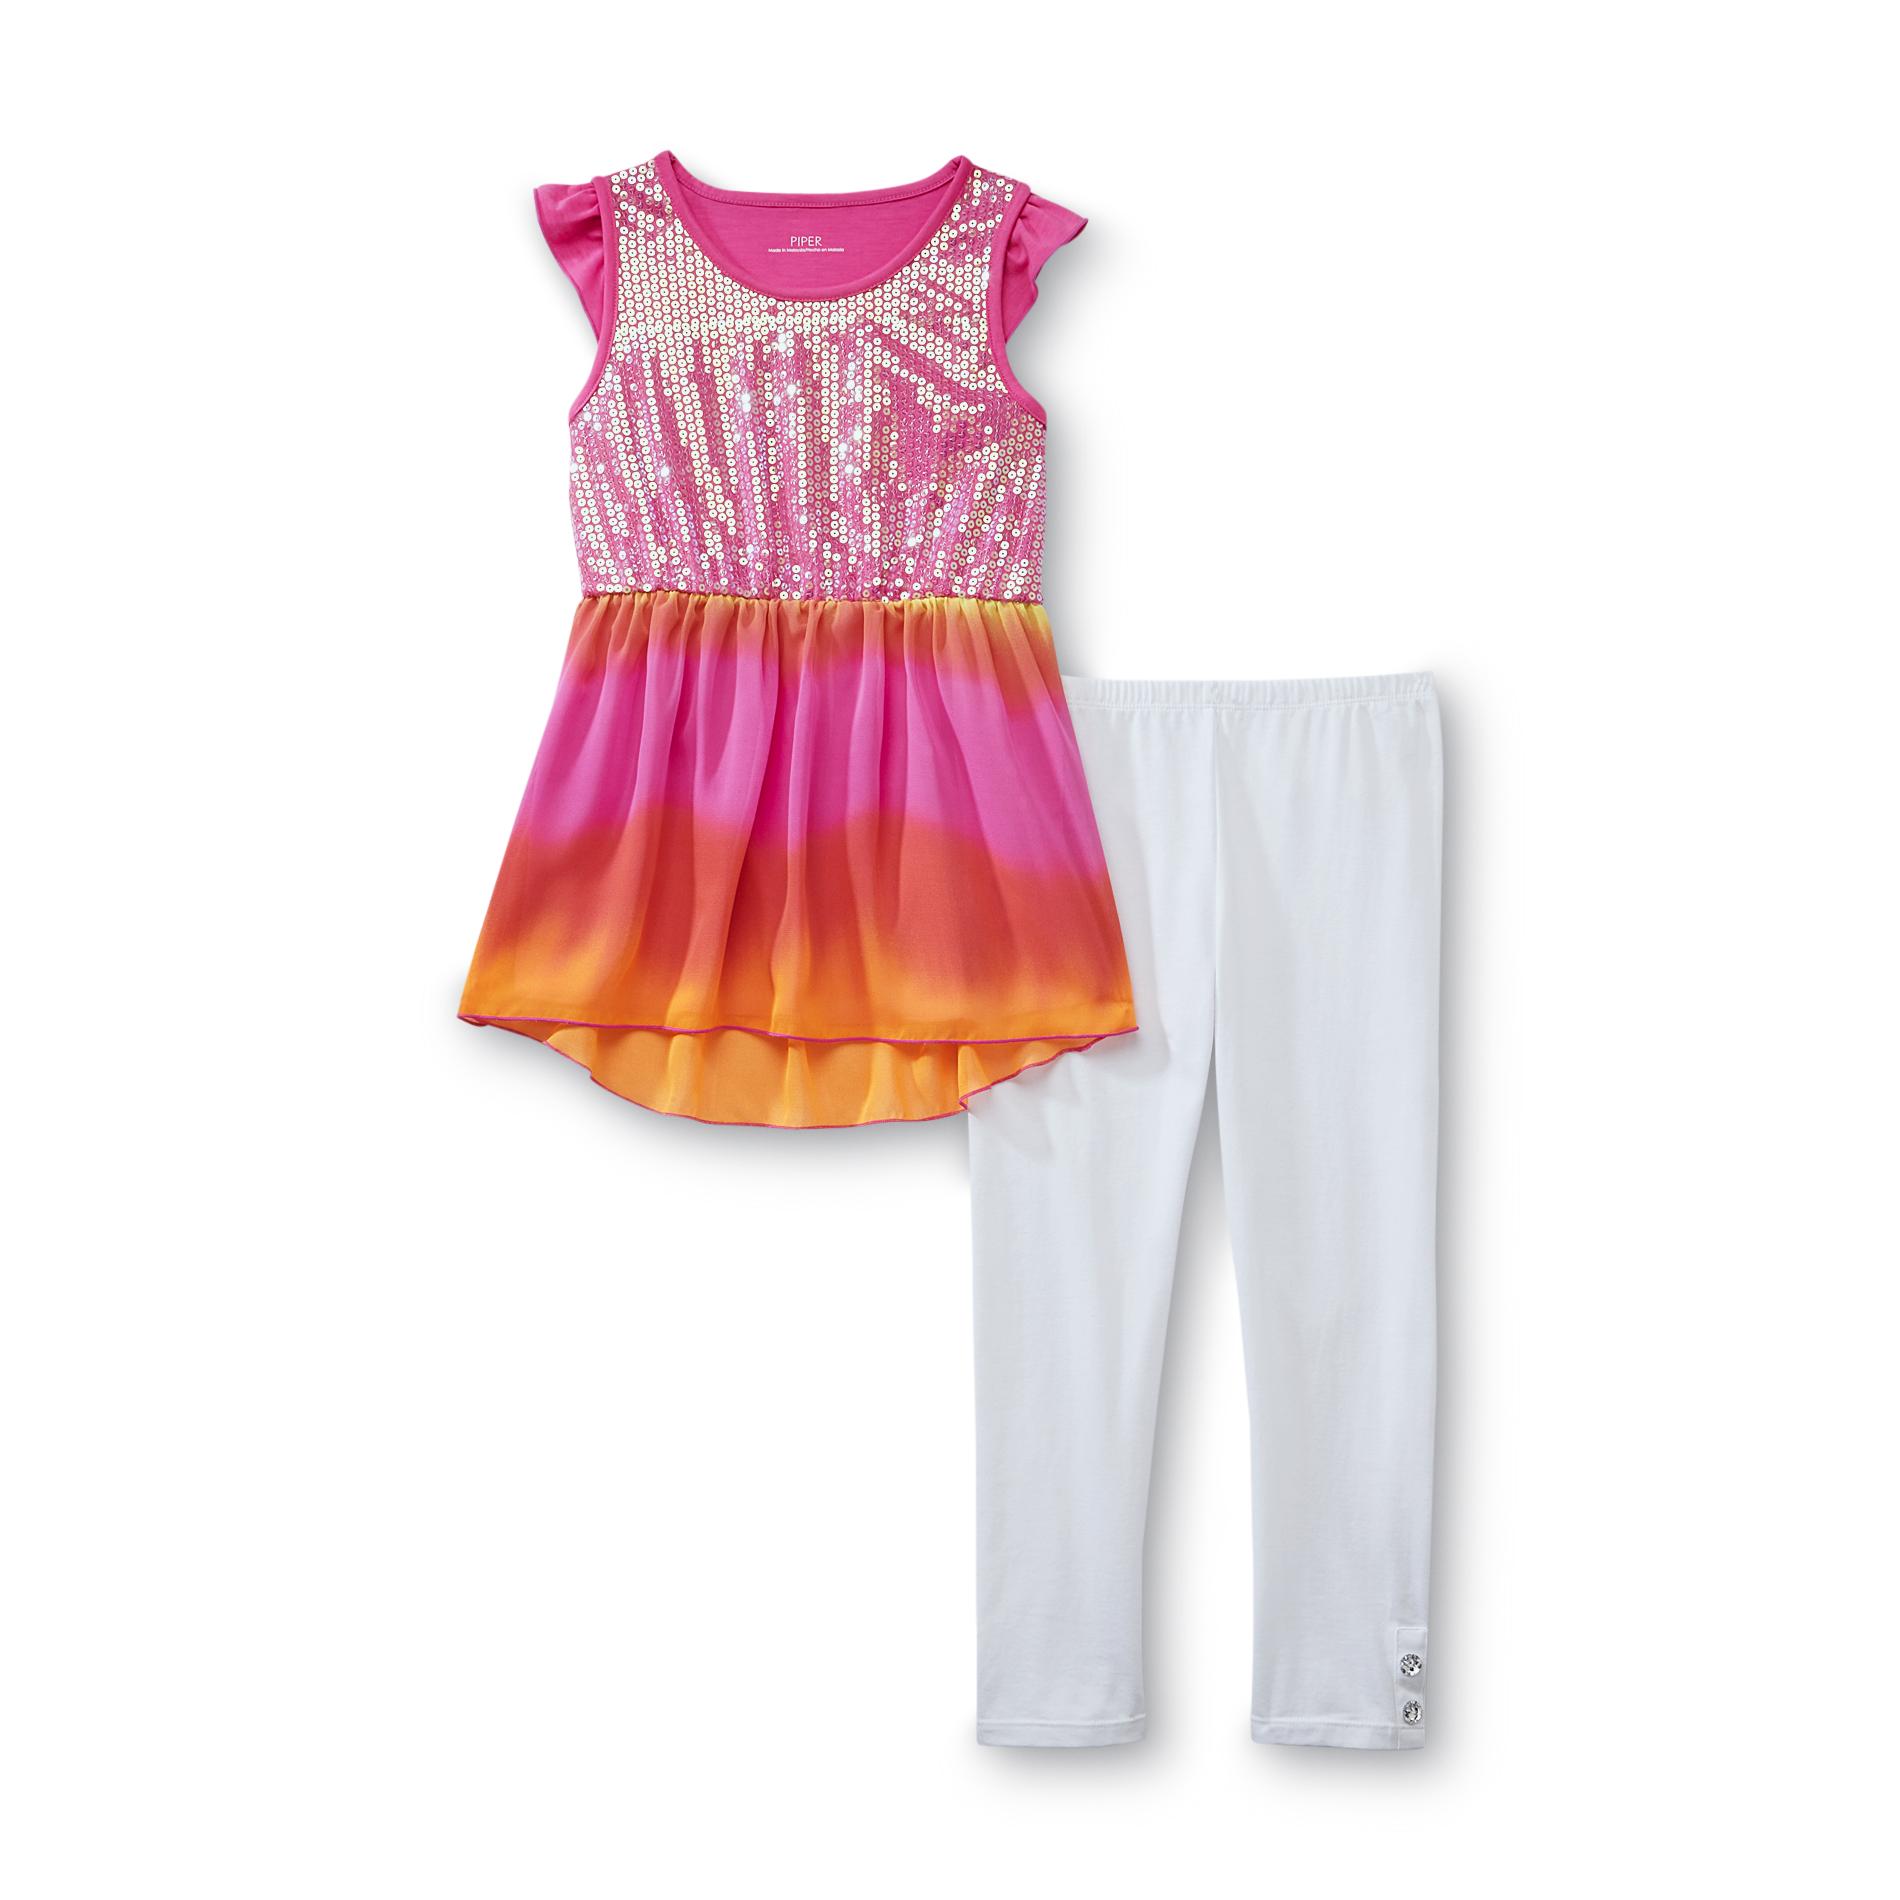 Piper Girl's Sequined Tunic & Leggings - Ombre